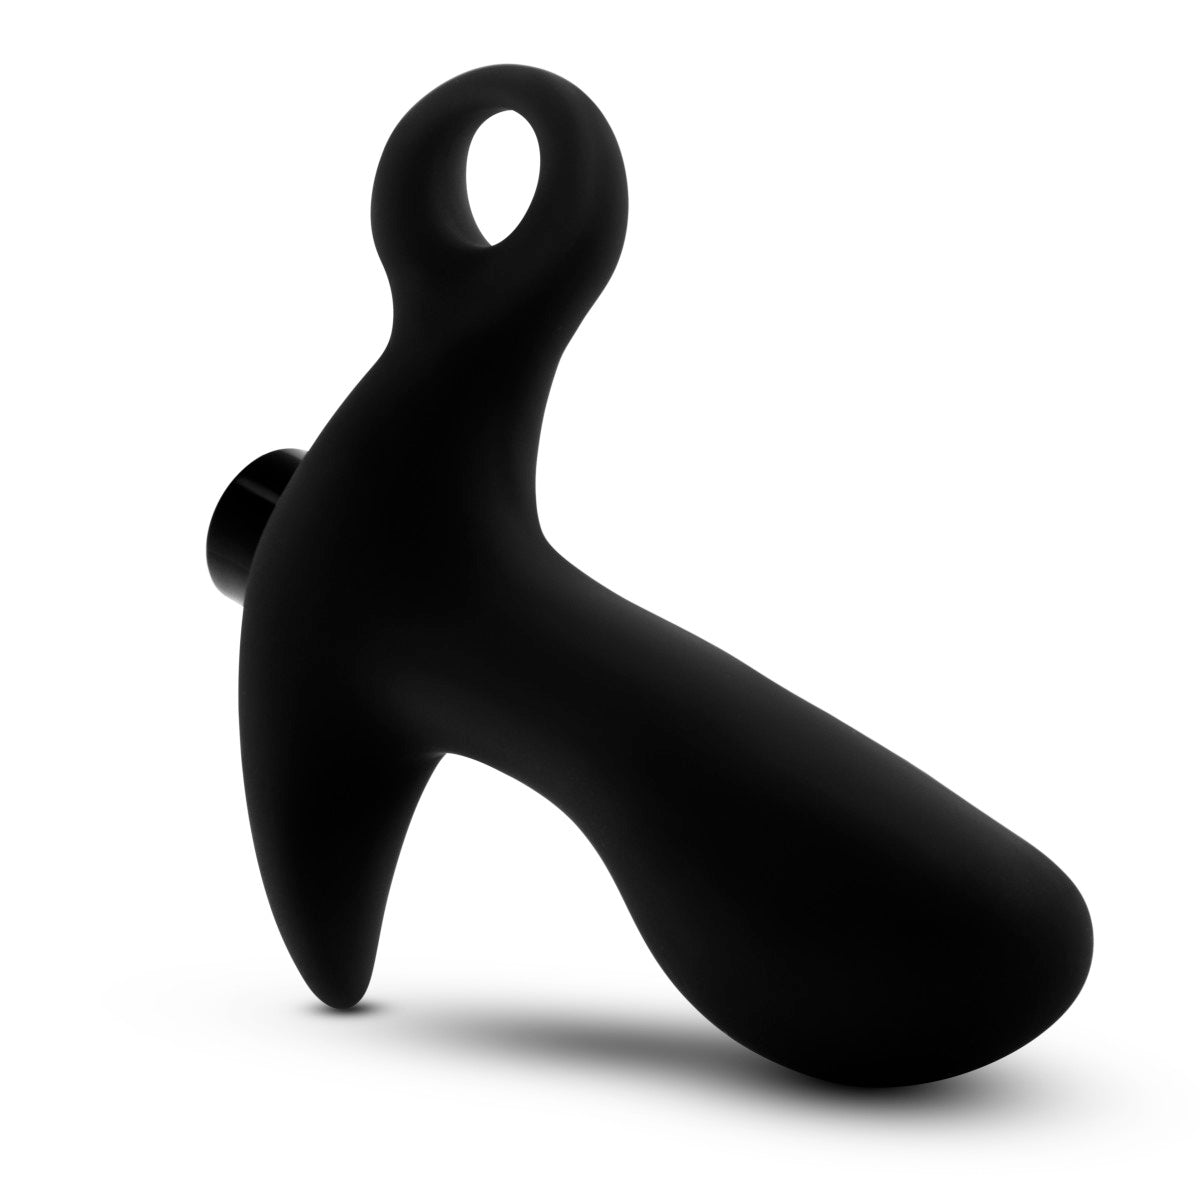 Anal Adventures Platinum Prostate Massager 01 Curved Black 4.25-Inch Vibrating Rechargeable Anal Plug